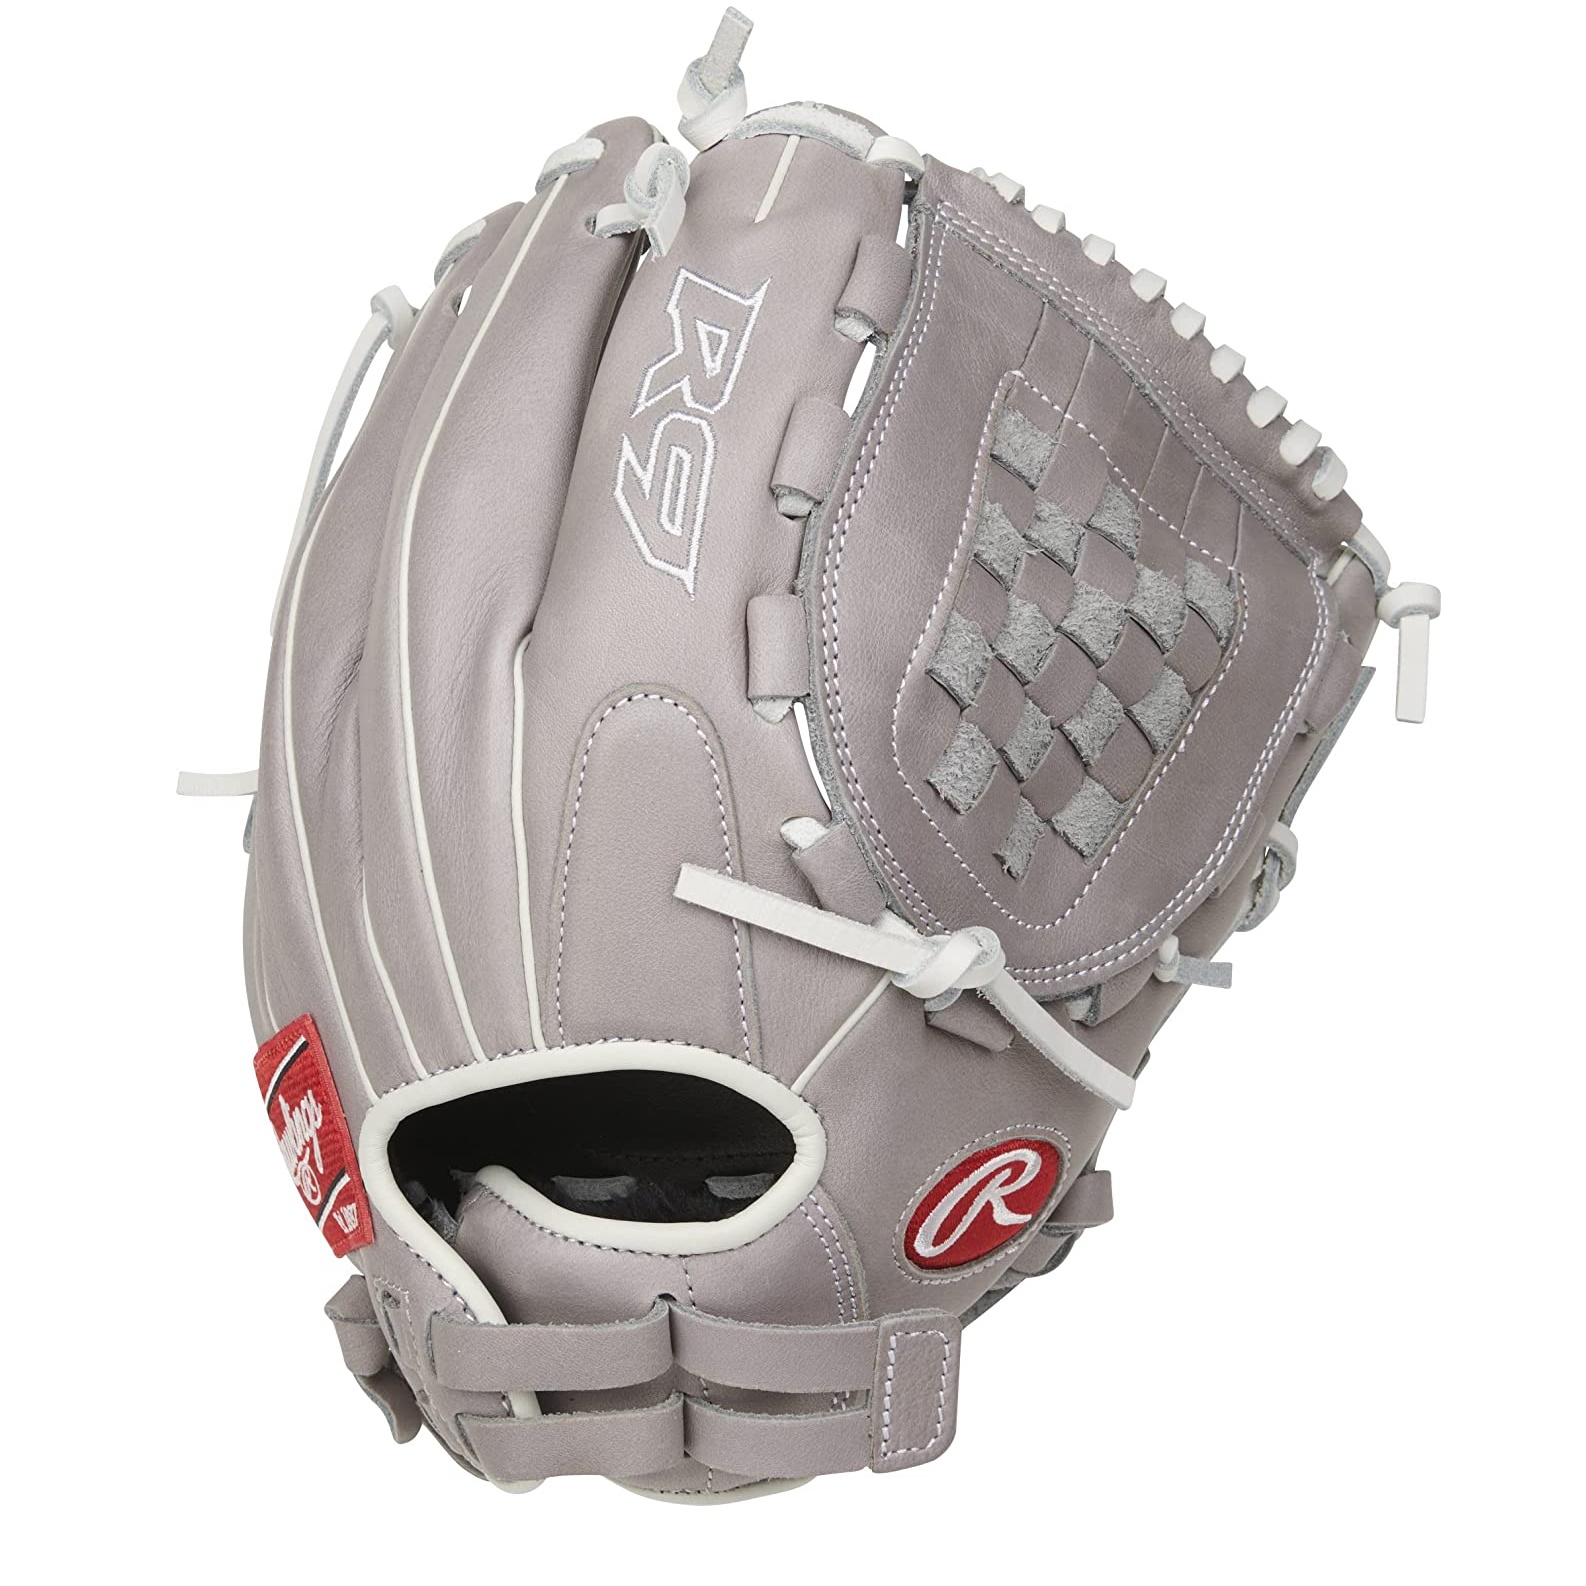 rawlings-r9-series-fastpitch-softball-glove-basket-web-12-inch-right-hand-throw R9SB120-3G-RightHandThrow Rawlings  The all new R9 Series softball gloves are the best gloves